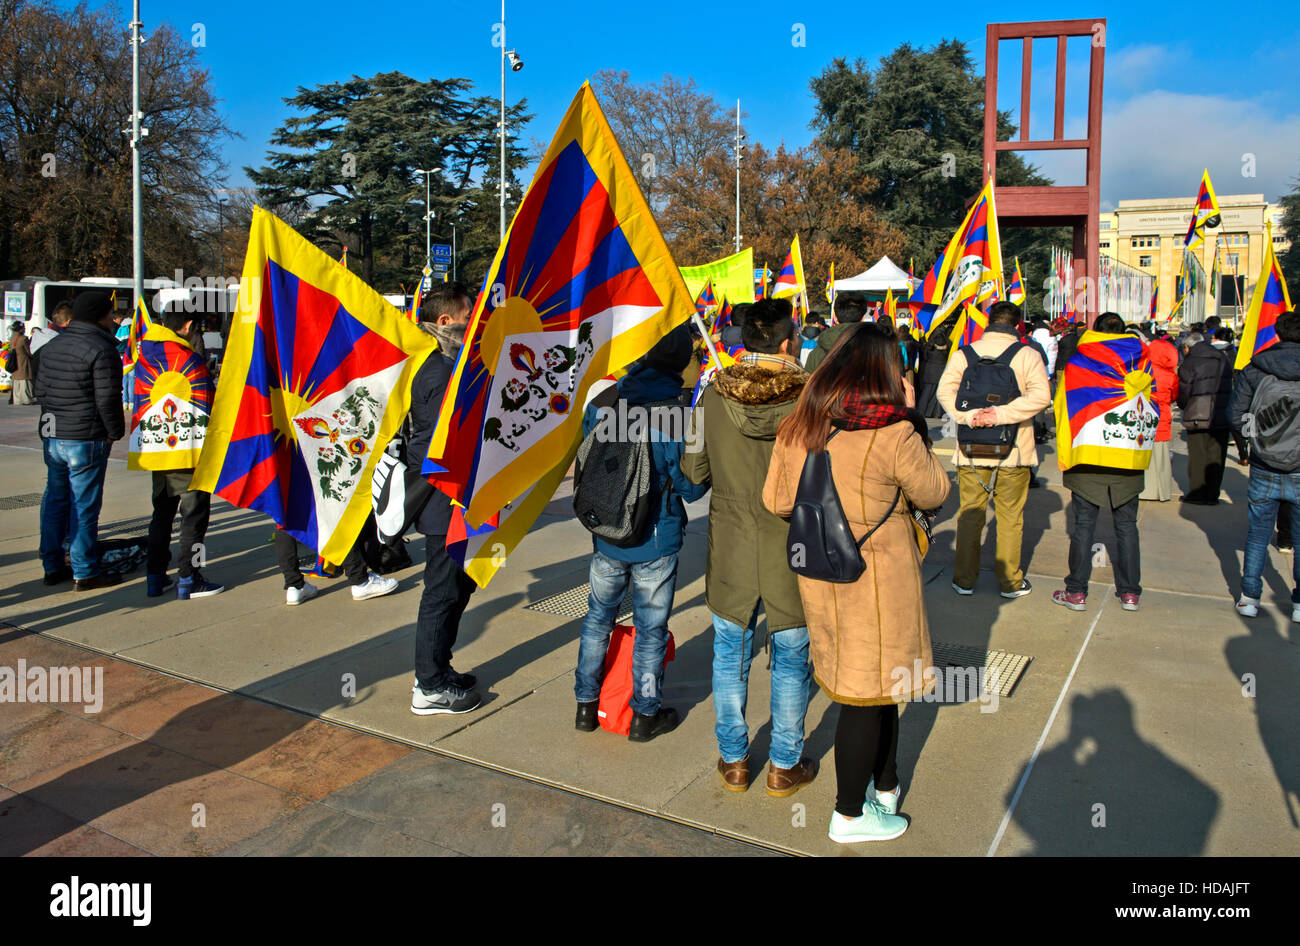 On the occasion of the Human Rights Day 2016 and in commemoration of the 27th anniversary of the conferment of the Nobel Peace Prize to the Dalai Lama, members of the Tibetan Community in Switzerland and Liechtenstein gather on 10 December 2016 in Geneva, Switzerland, on the Place des Nations in front of the United Nations European headquarters for a protest rally against human rights violations in Tibet, Geneva, Switzerland. Credit: GFC Collection/Alamy Live News Stock Photo